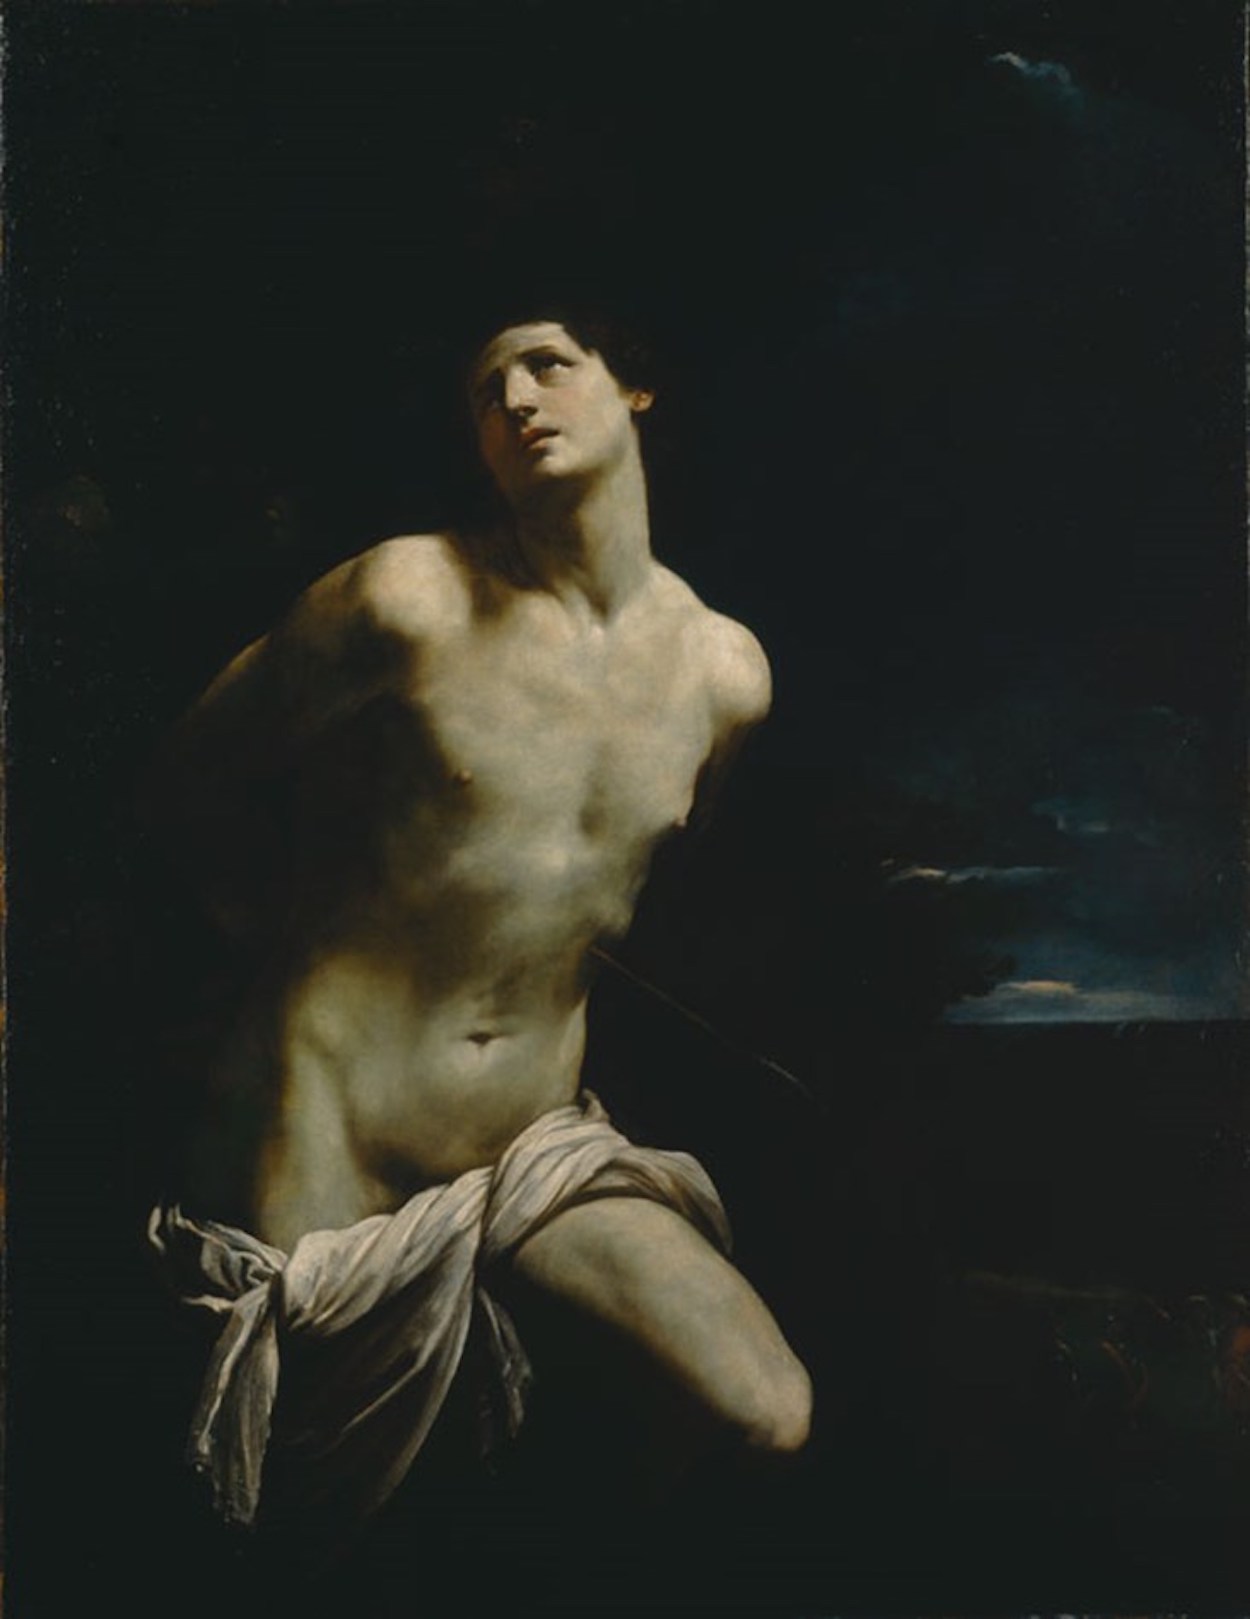 Heiliger Sebastian by Guido Reni - ca. 1630-35 - 170.1 x 131.1 cm Dulwich Picture Gallery